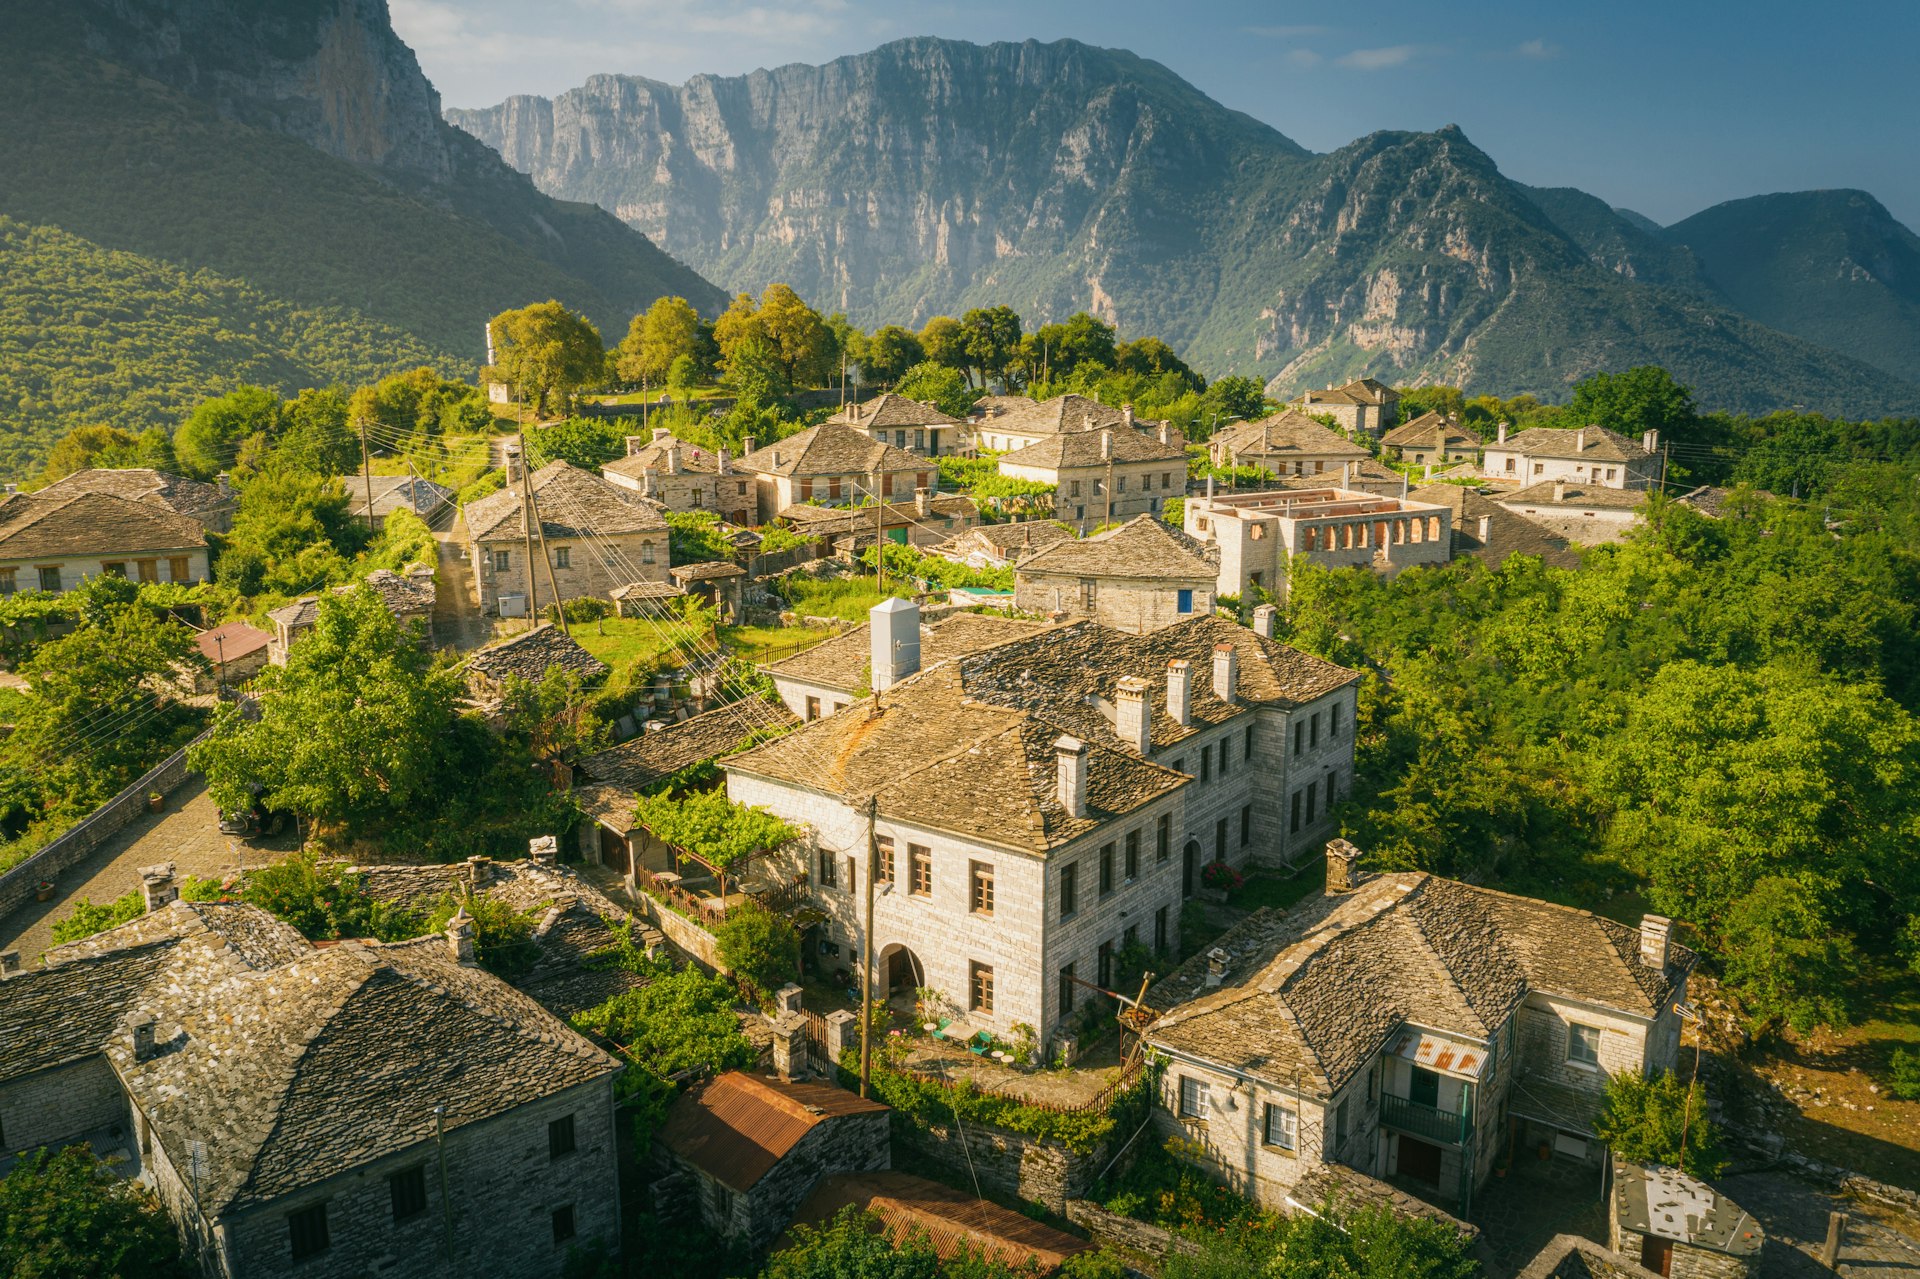 Village of Papingo and Mount Tymfi in Zagori (or Zagorochoria or Zagorohoria)  at Pindus Mountains, Greece; the buildings are surrounded by trees and mountains